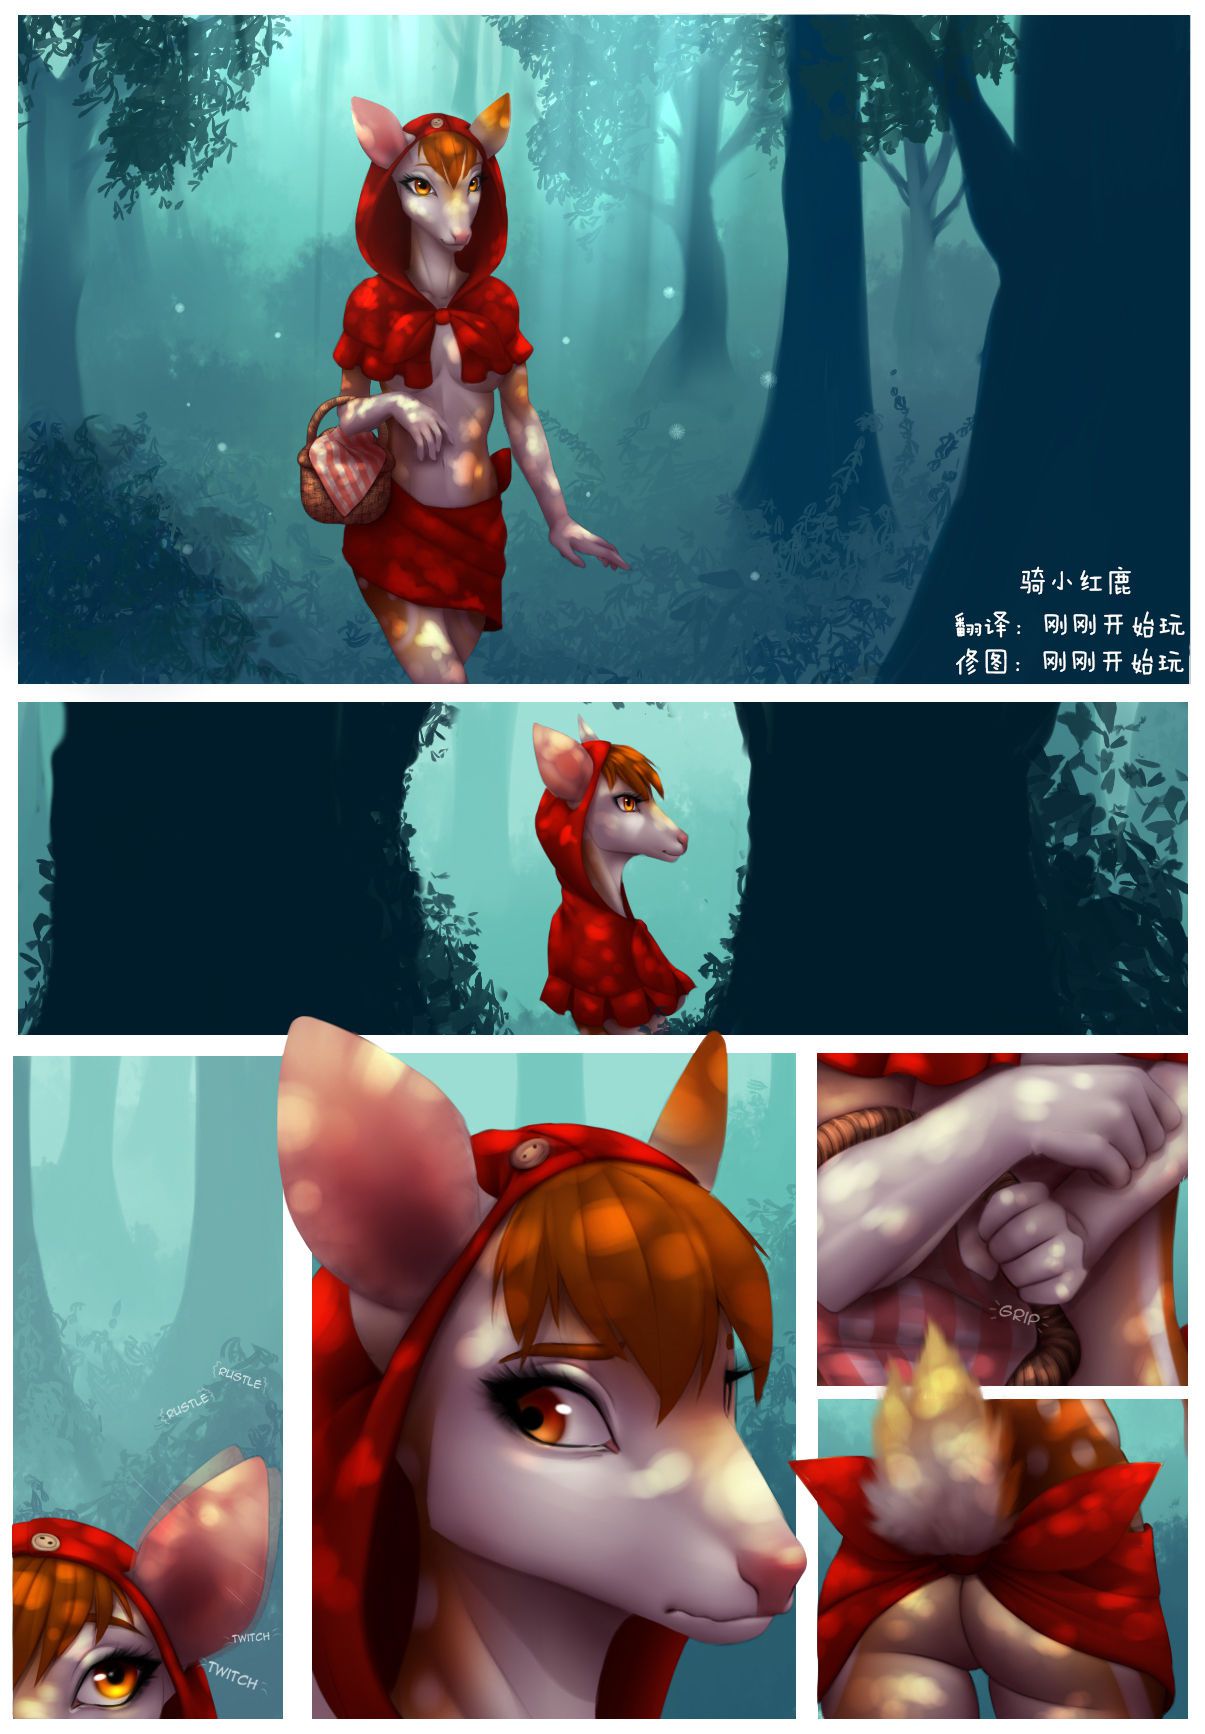 [Celeste] Little Red Riding Deer[Chinese] [刚刚开始玩汉化] Language:Chinese  TR 1